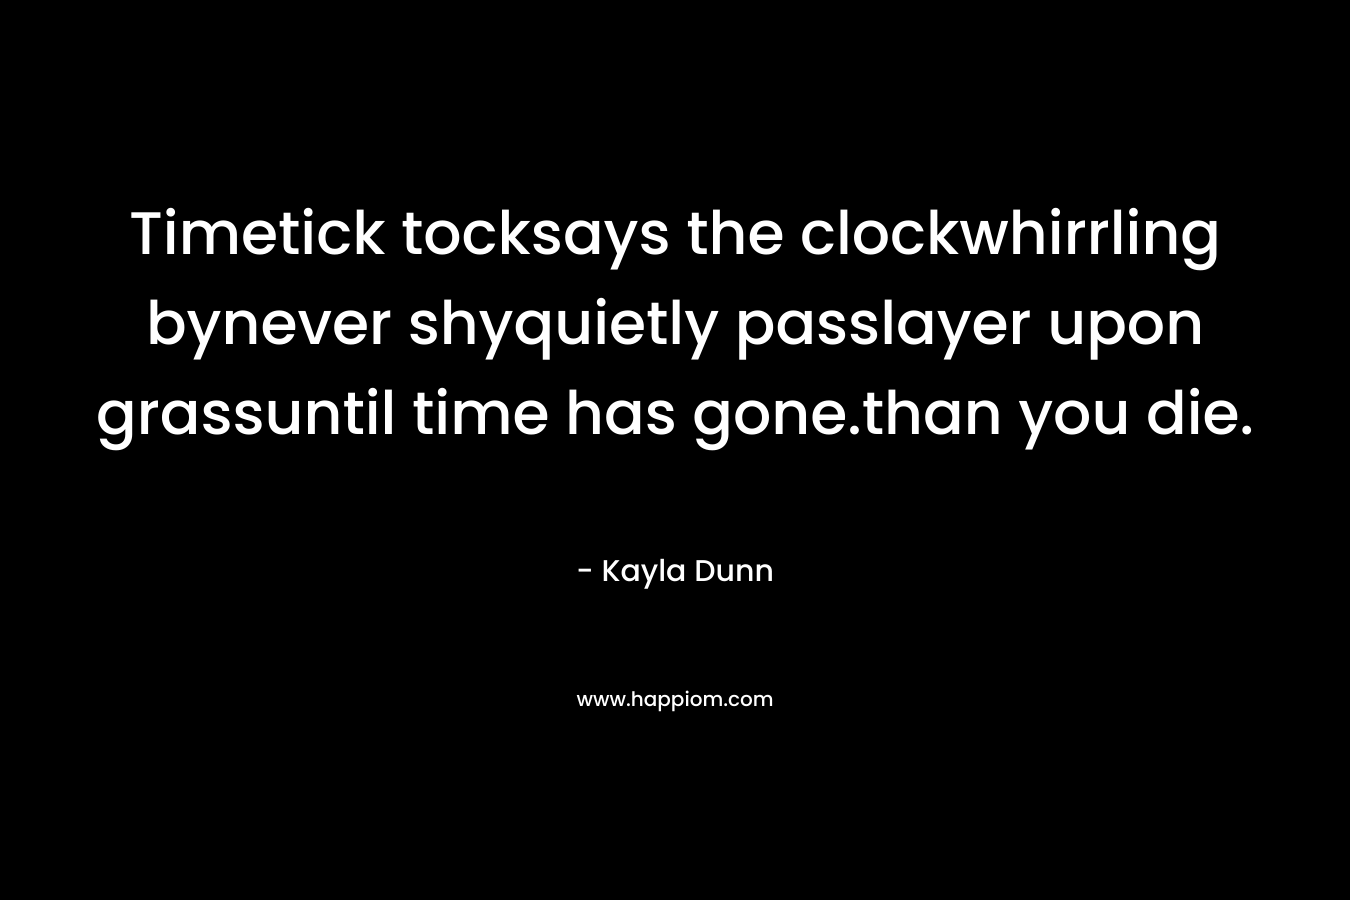 Timetick tocksays the clockwhirrling bynever shyquietly passlayer upon grassuntil time has gone.than you die. – Kayla Dunn